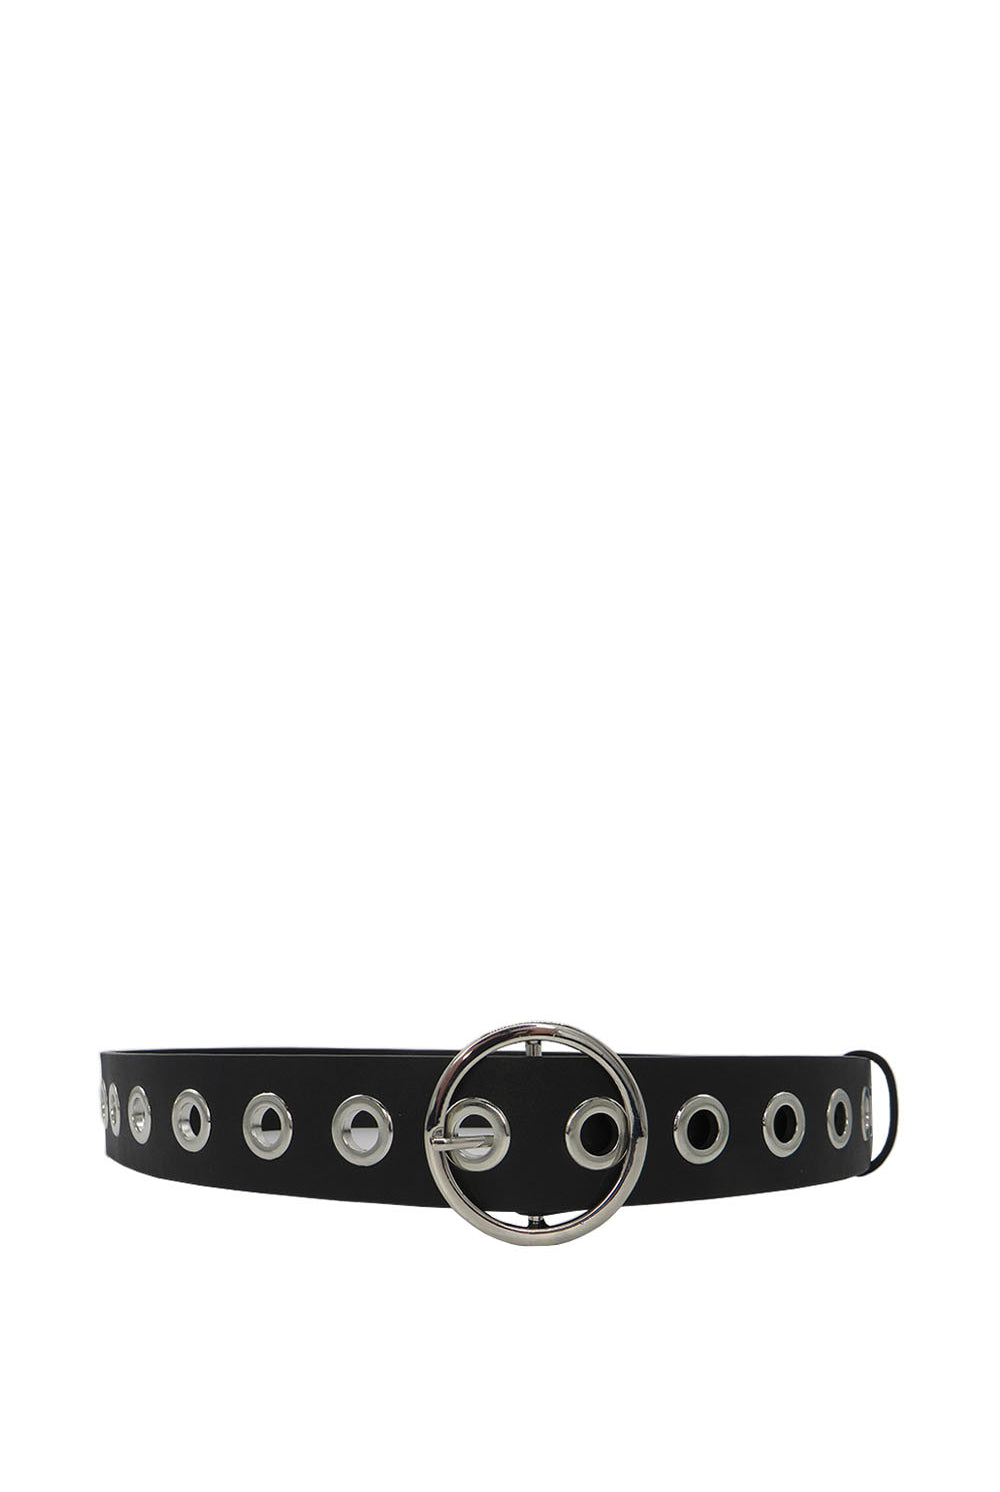 My Accessories London Circular Buckle Eyelet Belt in Black and Silver | Grunge | Festival | Party | Glam | Going Out | Going out | Women's | Accessory | Accessories | Elevated indie | Grunge Sleaze | Grunge | E girl | Rave | Work | Casual  